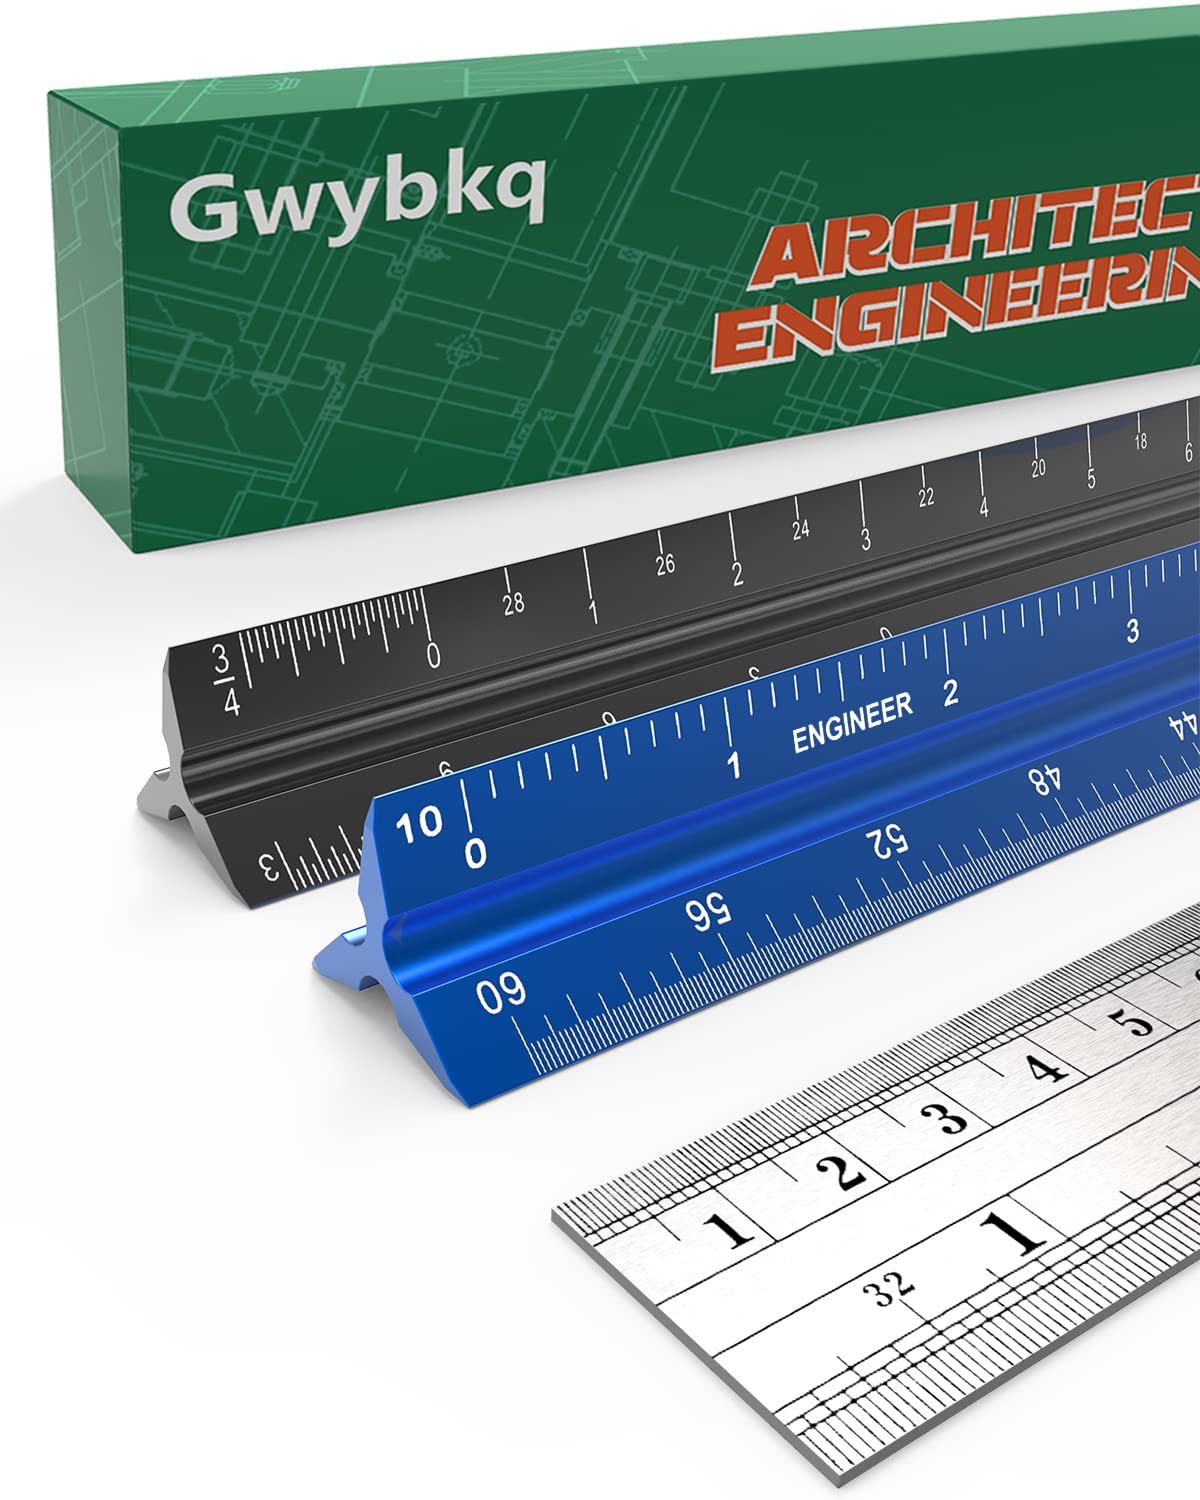 Gwybkq Architect Scale Ruler And Engineering Scale Ruler Set With Standard  Metal Scale 12-Inch Ruler For Blueprint Drafting Ruler For A